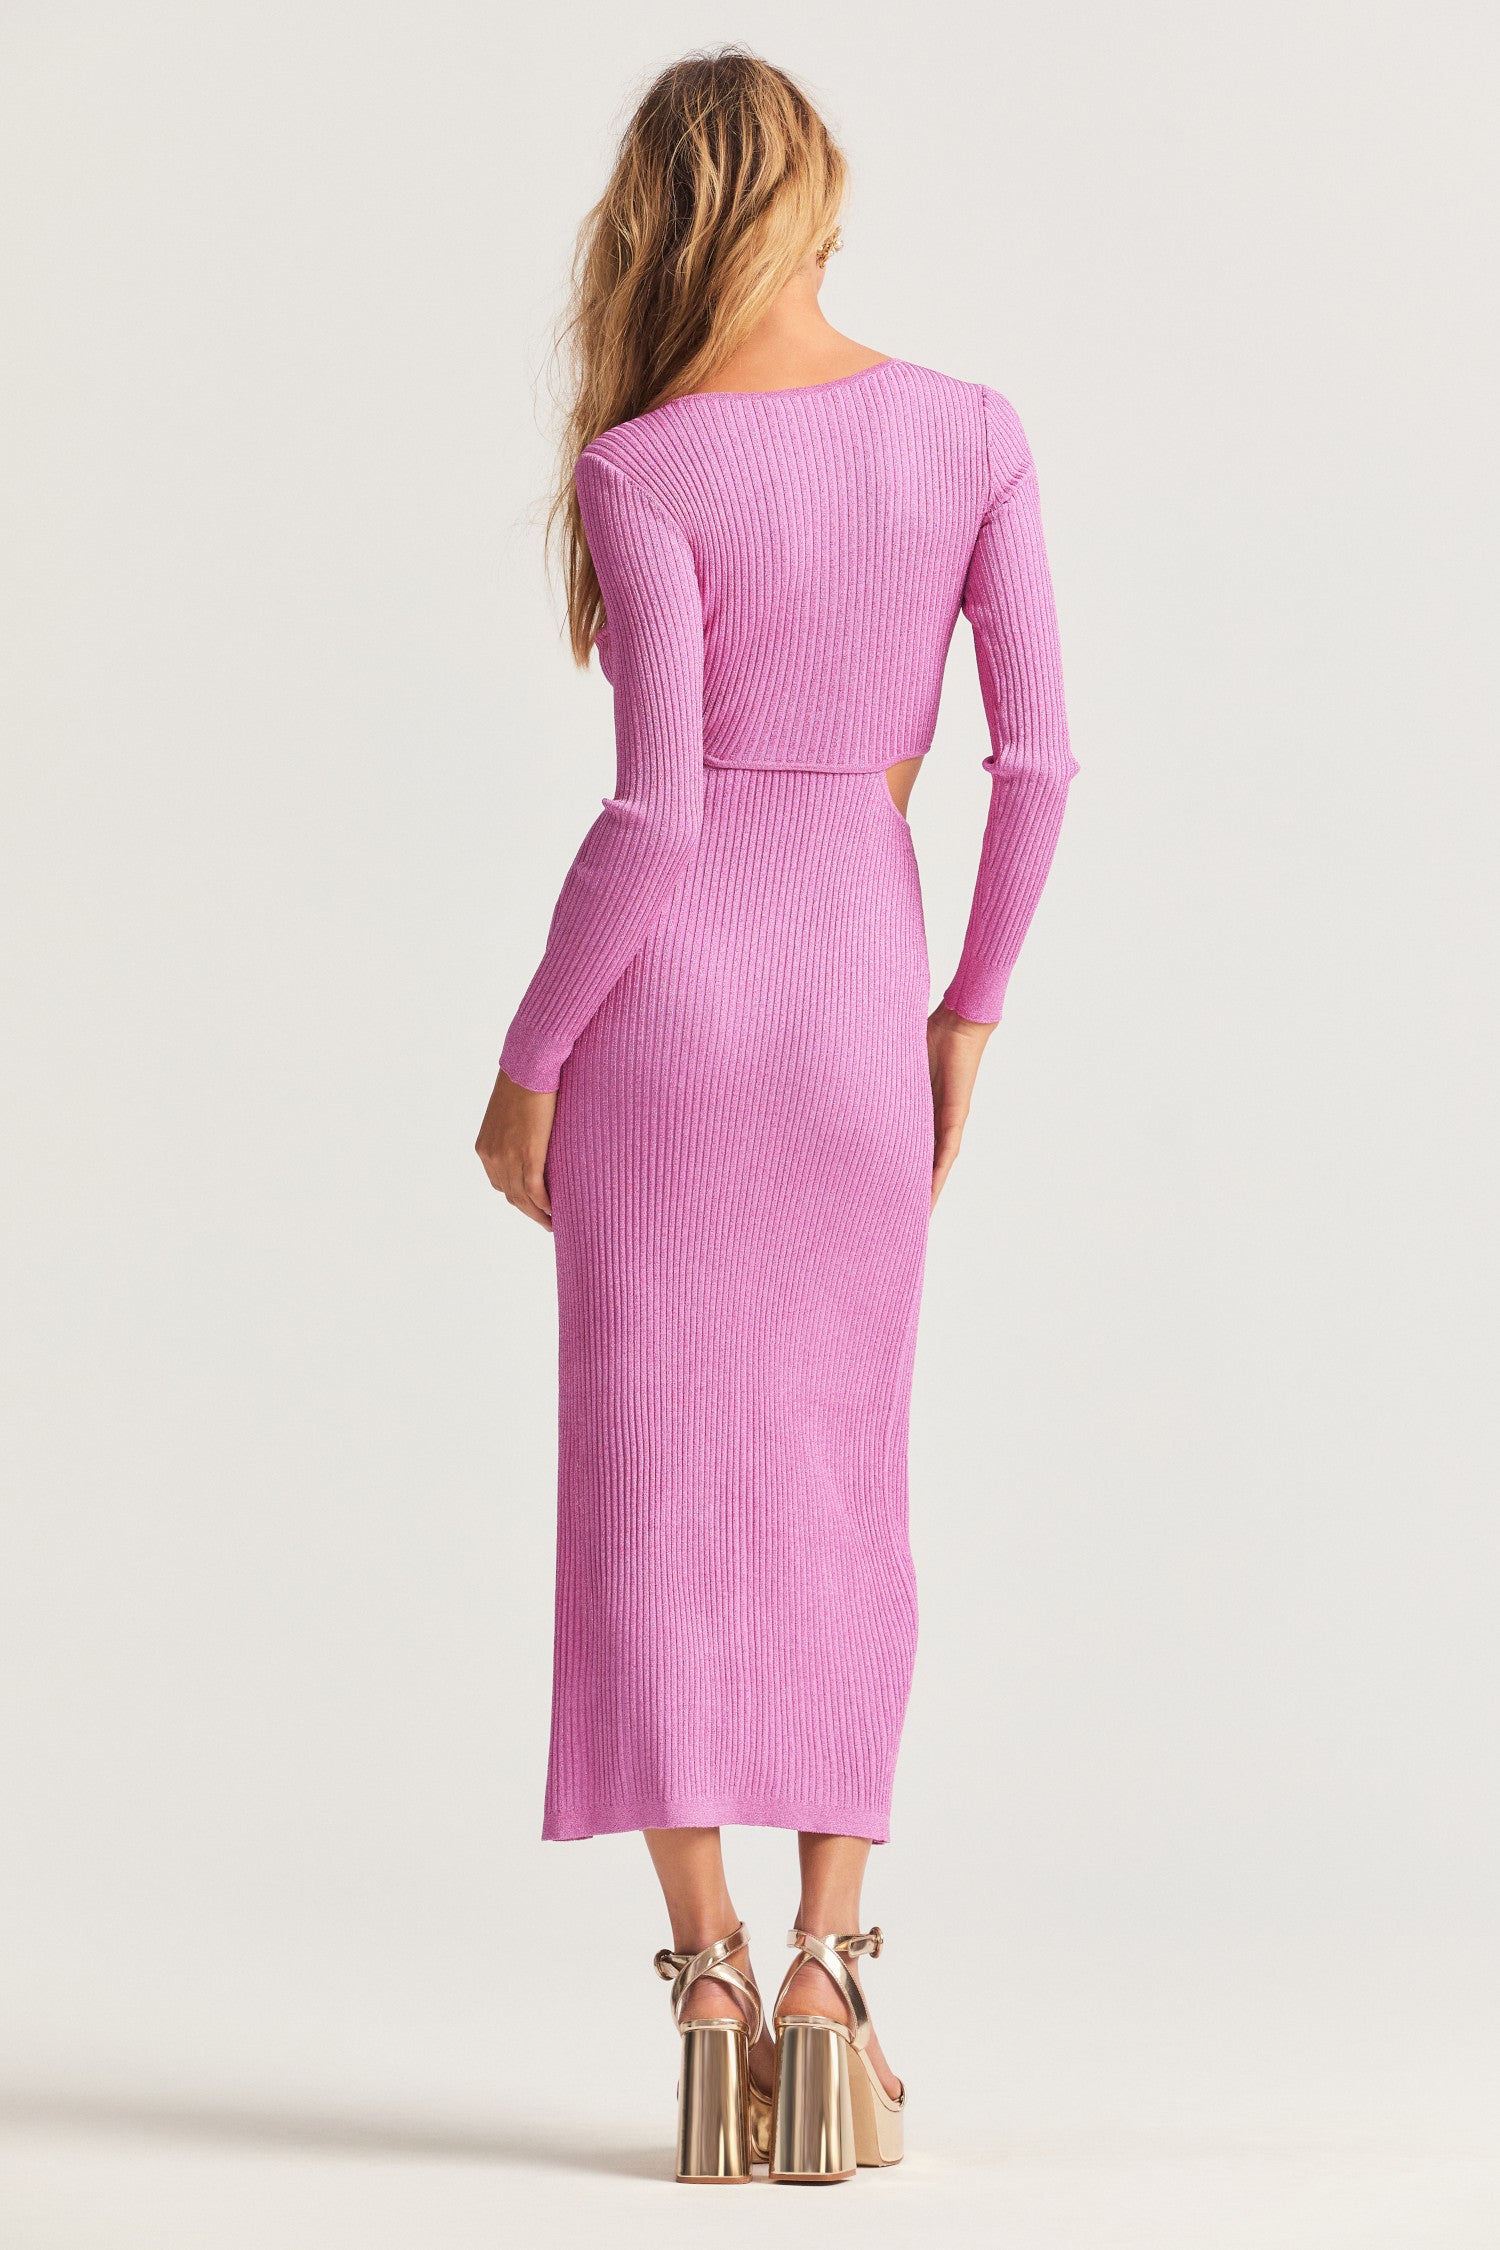 Midi dress with soft yarn, completely plated with lurex so it shimmers all over. This ribbed knit, fitted dress has a stretchy, comfy fit with a twist detail at the center front that leads to flirty cut-outs on each side. In addition to a slit at the wearer's left. 